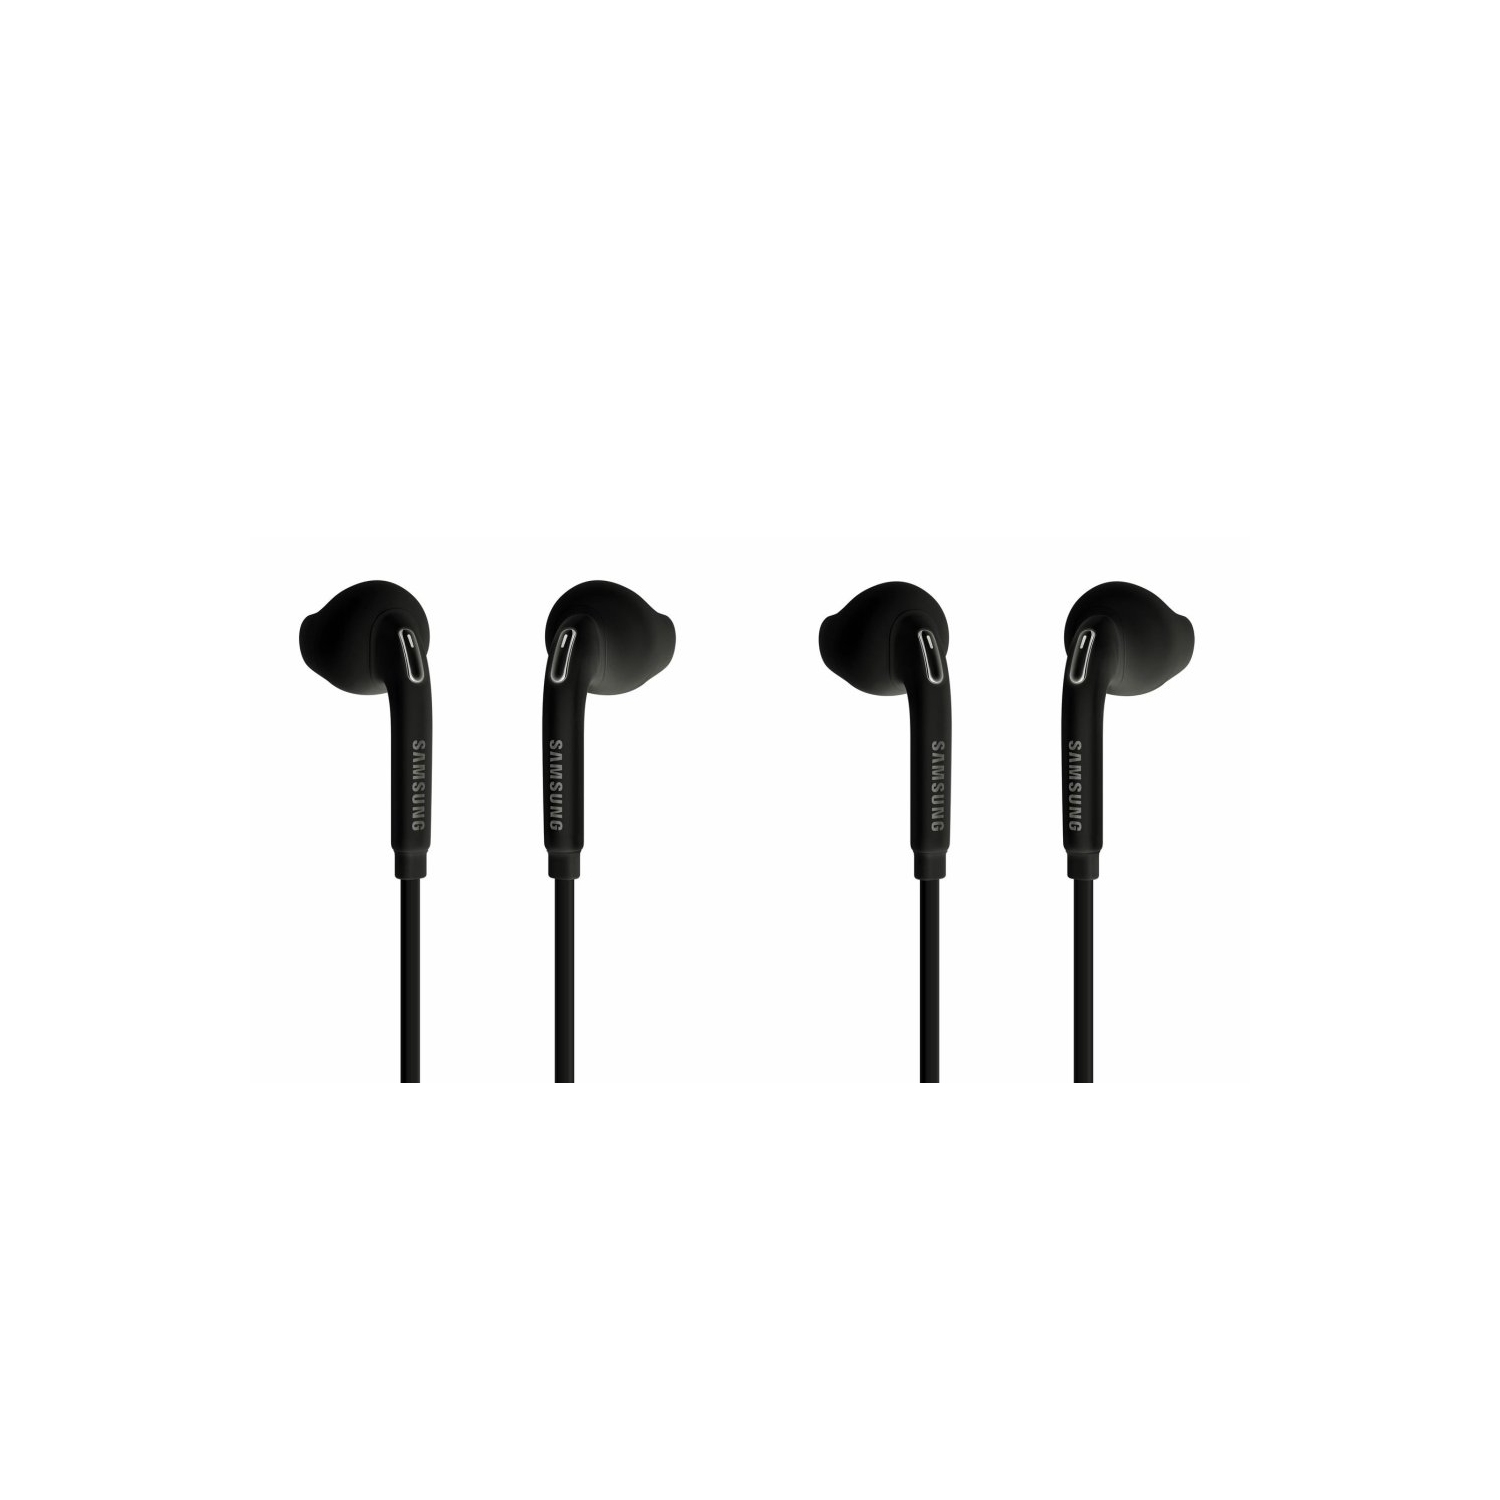 (2 Pack) Samsung 3.5mm Premium Sound Stereo Earphones Headphones Earbuds Headset for Galaxy S5 S6 S6 Edge+ Note 4 5 EO-EG920BB